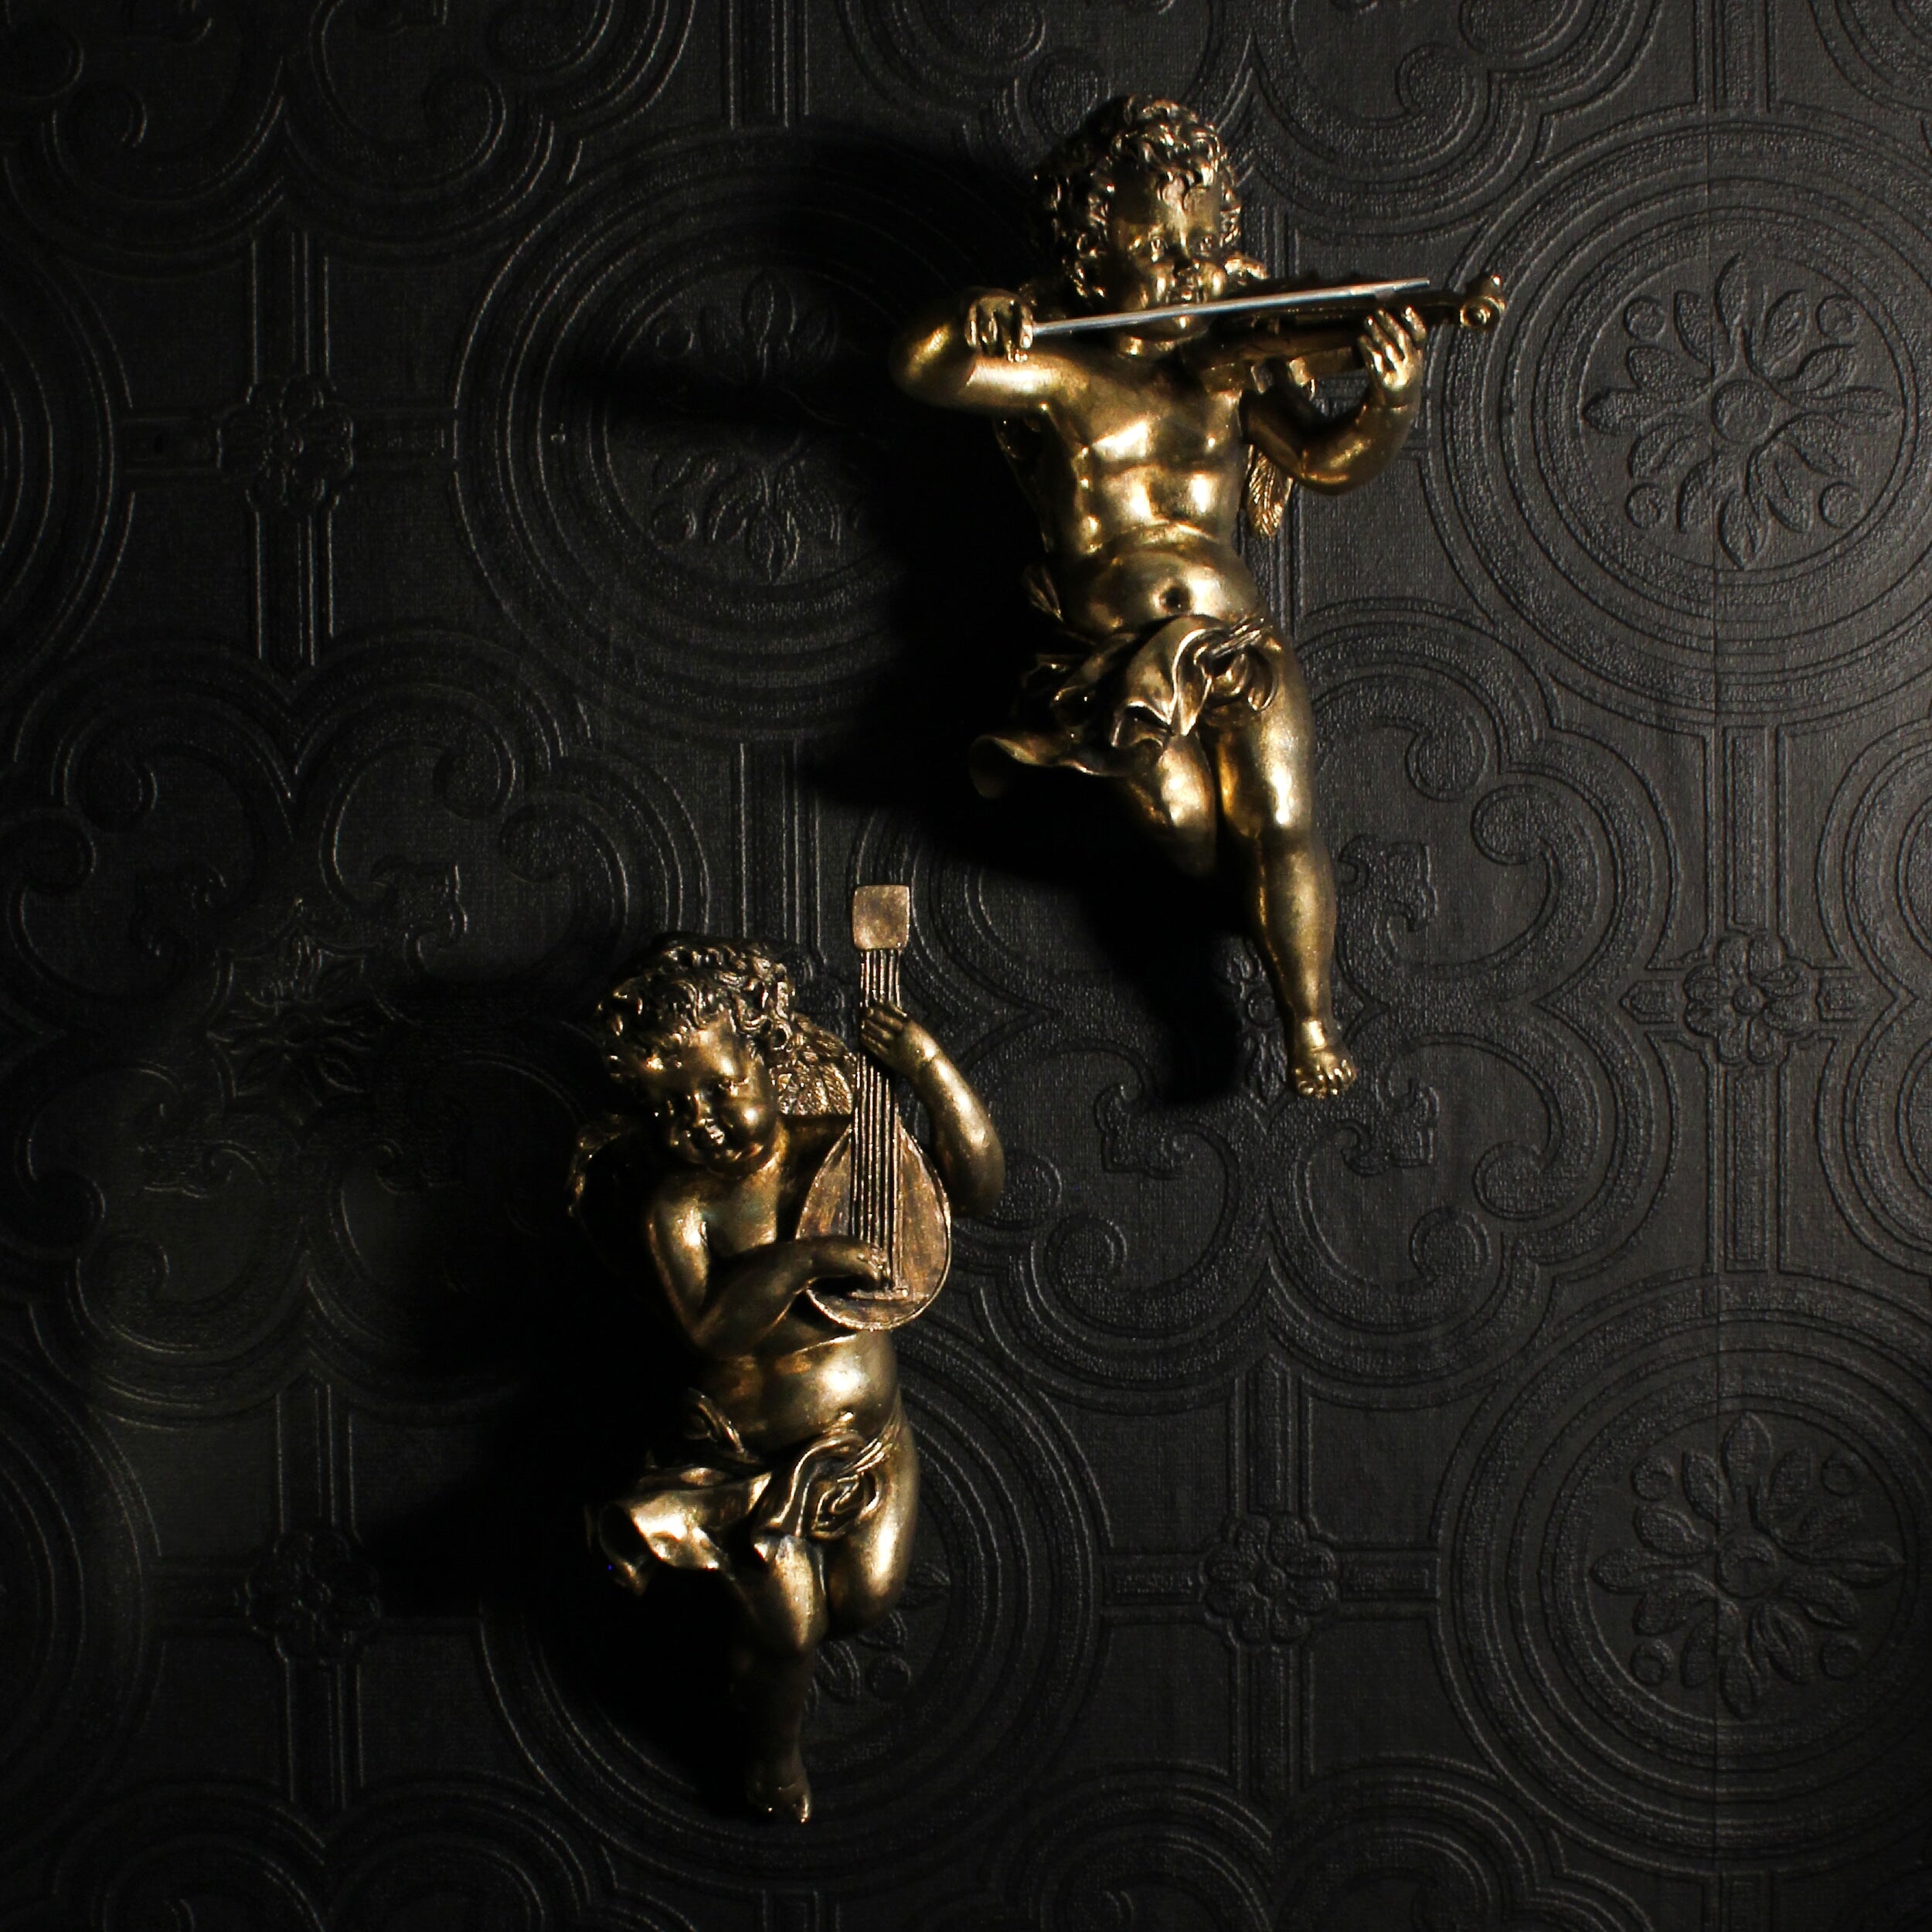 GOLD CHEUB WITH VIOLIN AND MANDOLIN WALL HANGING WALL DECOR THE BLACKENED TEETH THE BLACKENED ABODE